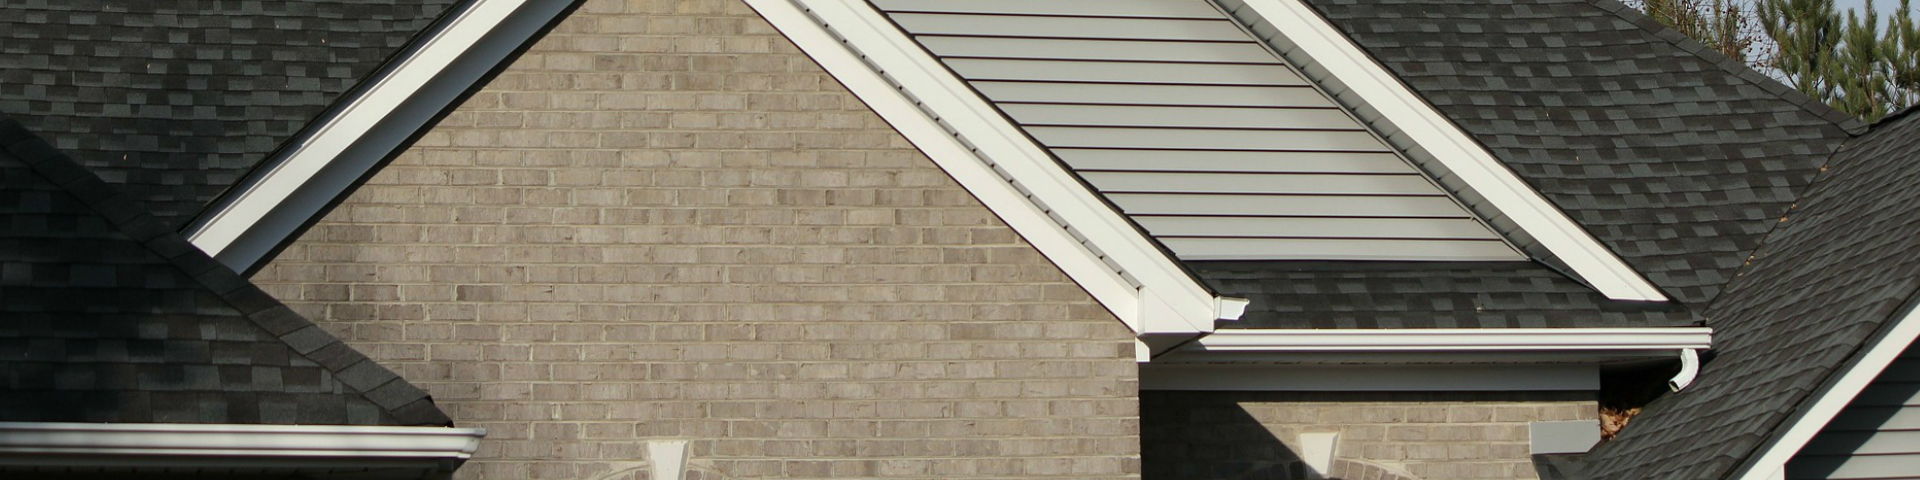 home Gutter guard Installation Westchester ny